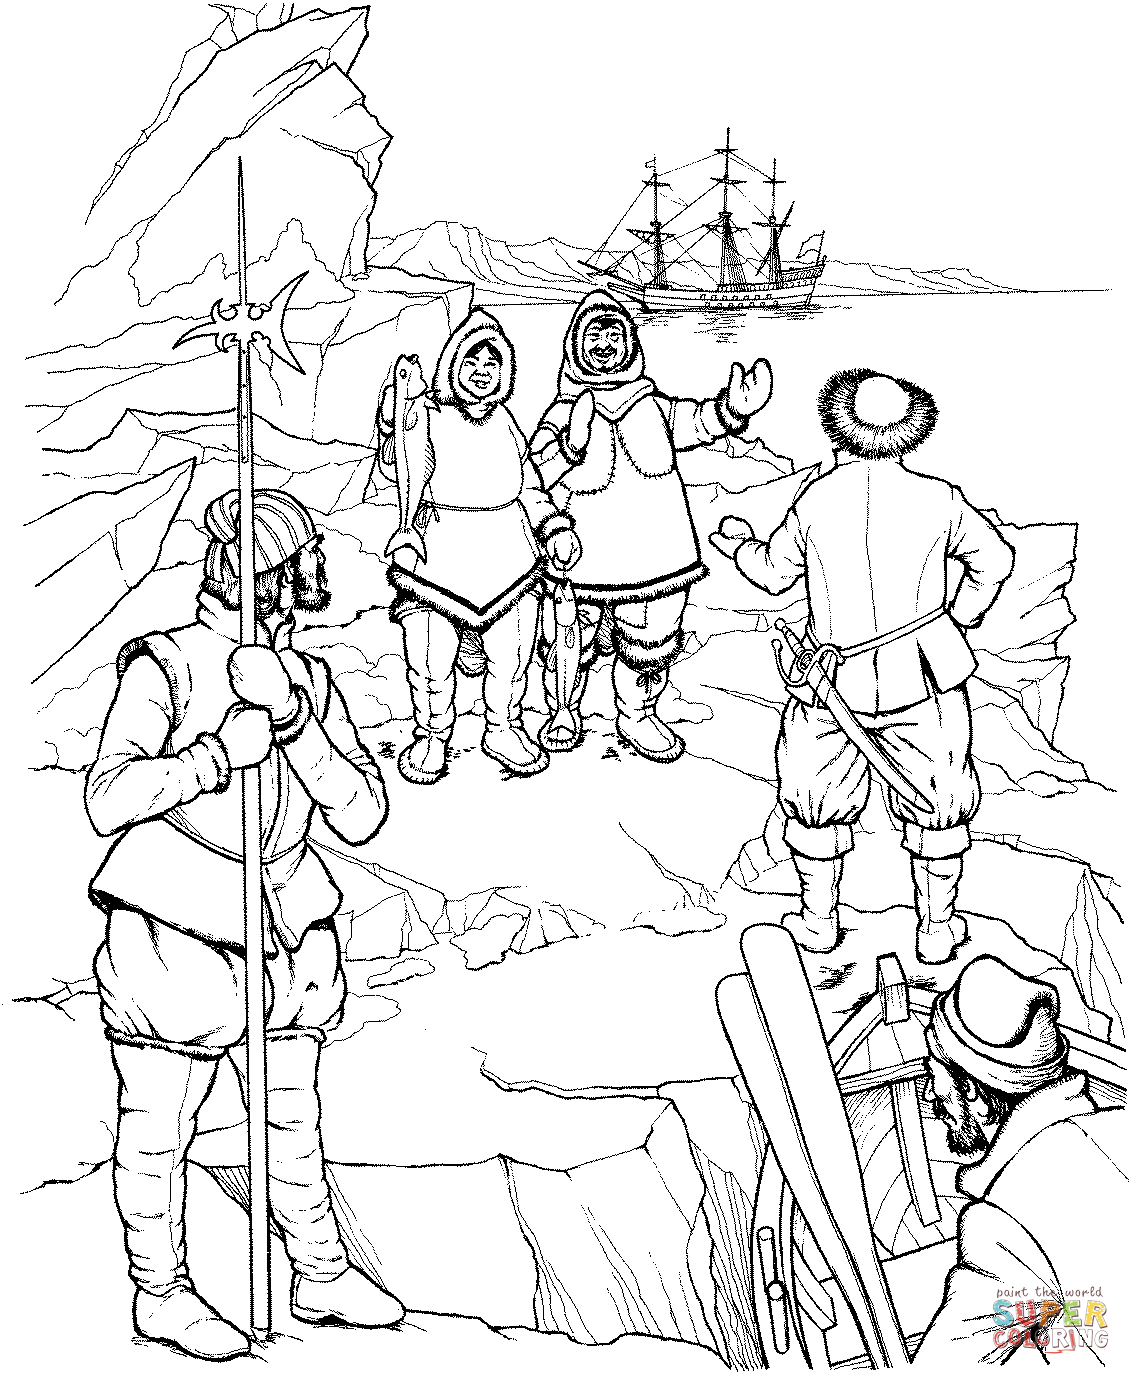 Inuit Coloring Pages Eskimo Meets First Explorers Of North America Coloring Page Free